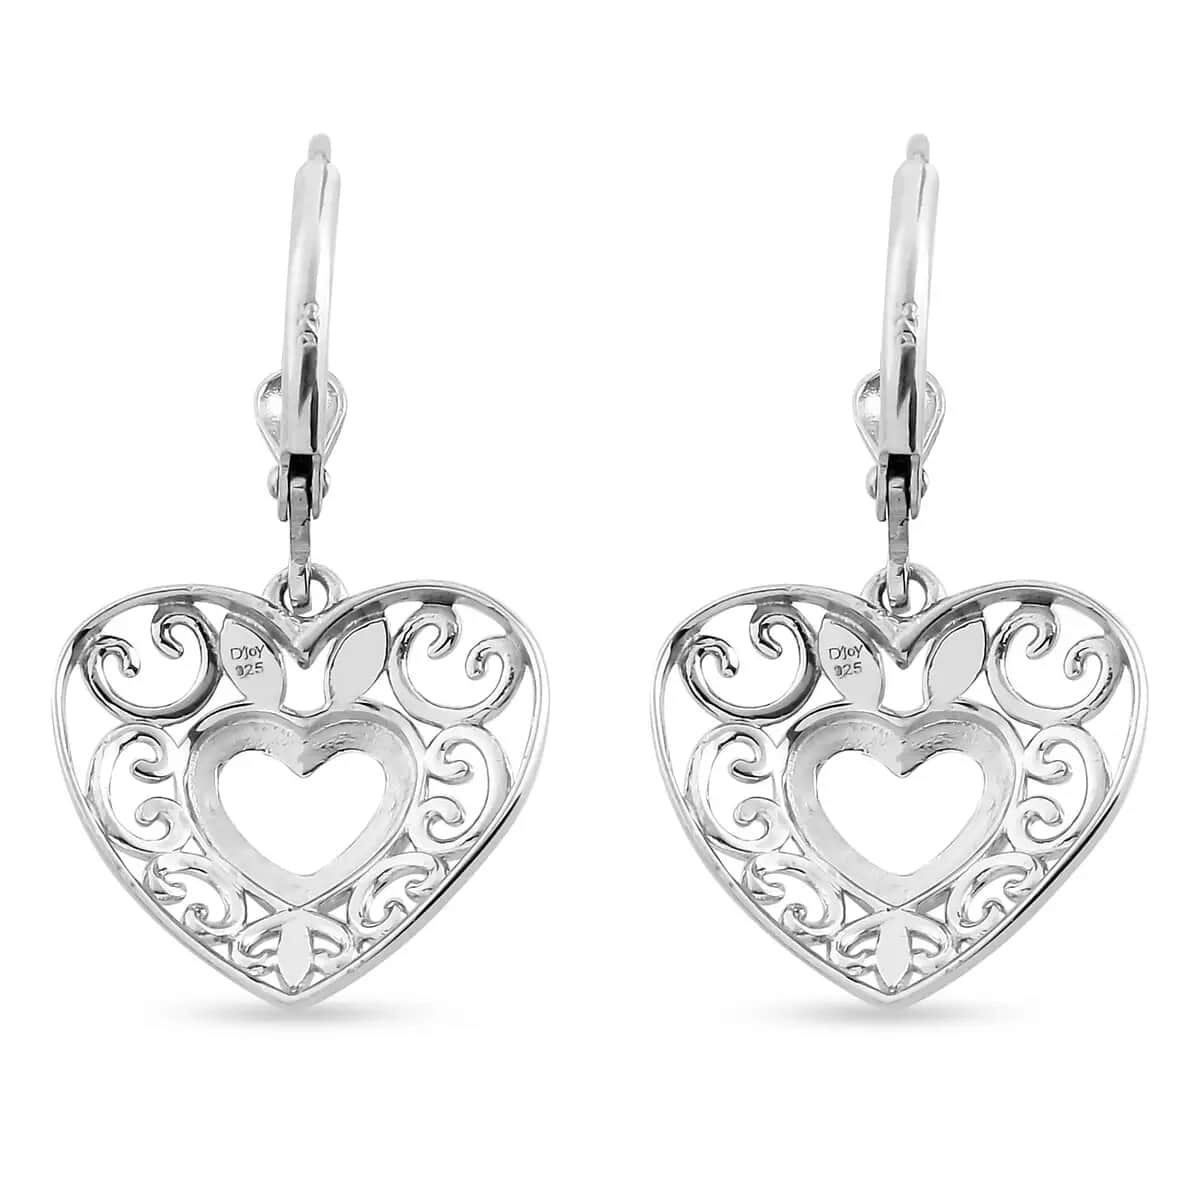 Mother’s Day Gift Openwork Earrings, Filigree Earrings, Lever Back Earrings, Drop Earrings, Platinum Plated Sterling Silver Earrings, Heart Earrings For Women, Jewelry Gifts For Birthday image number 4